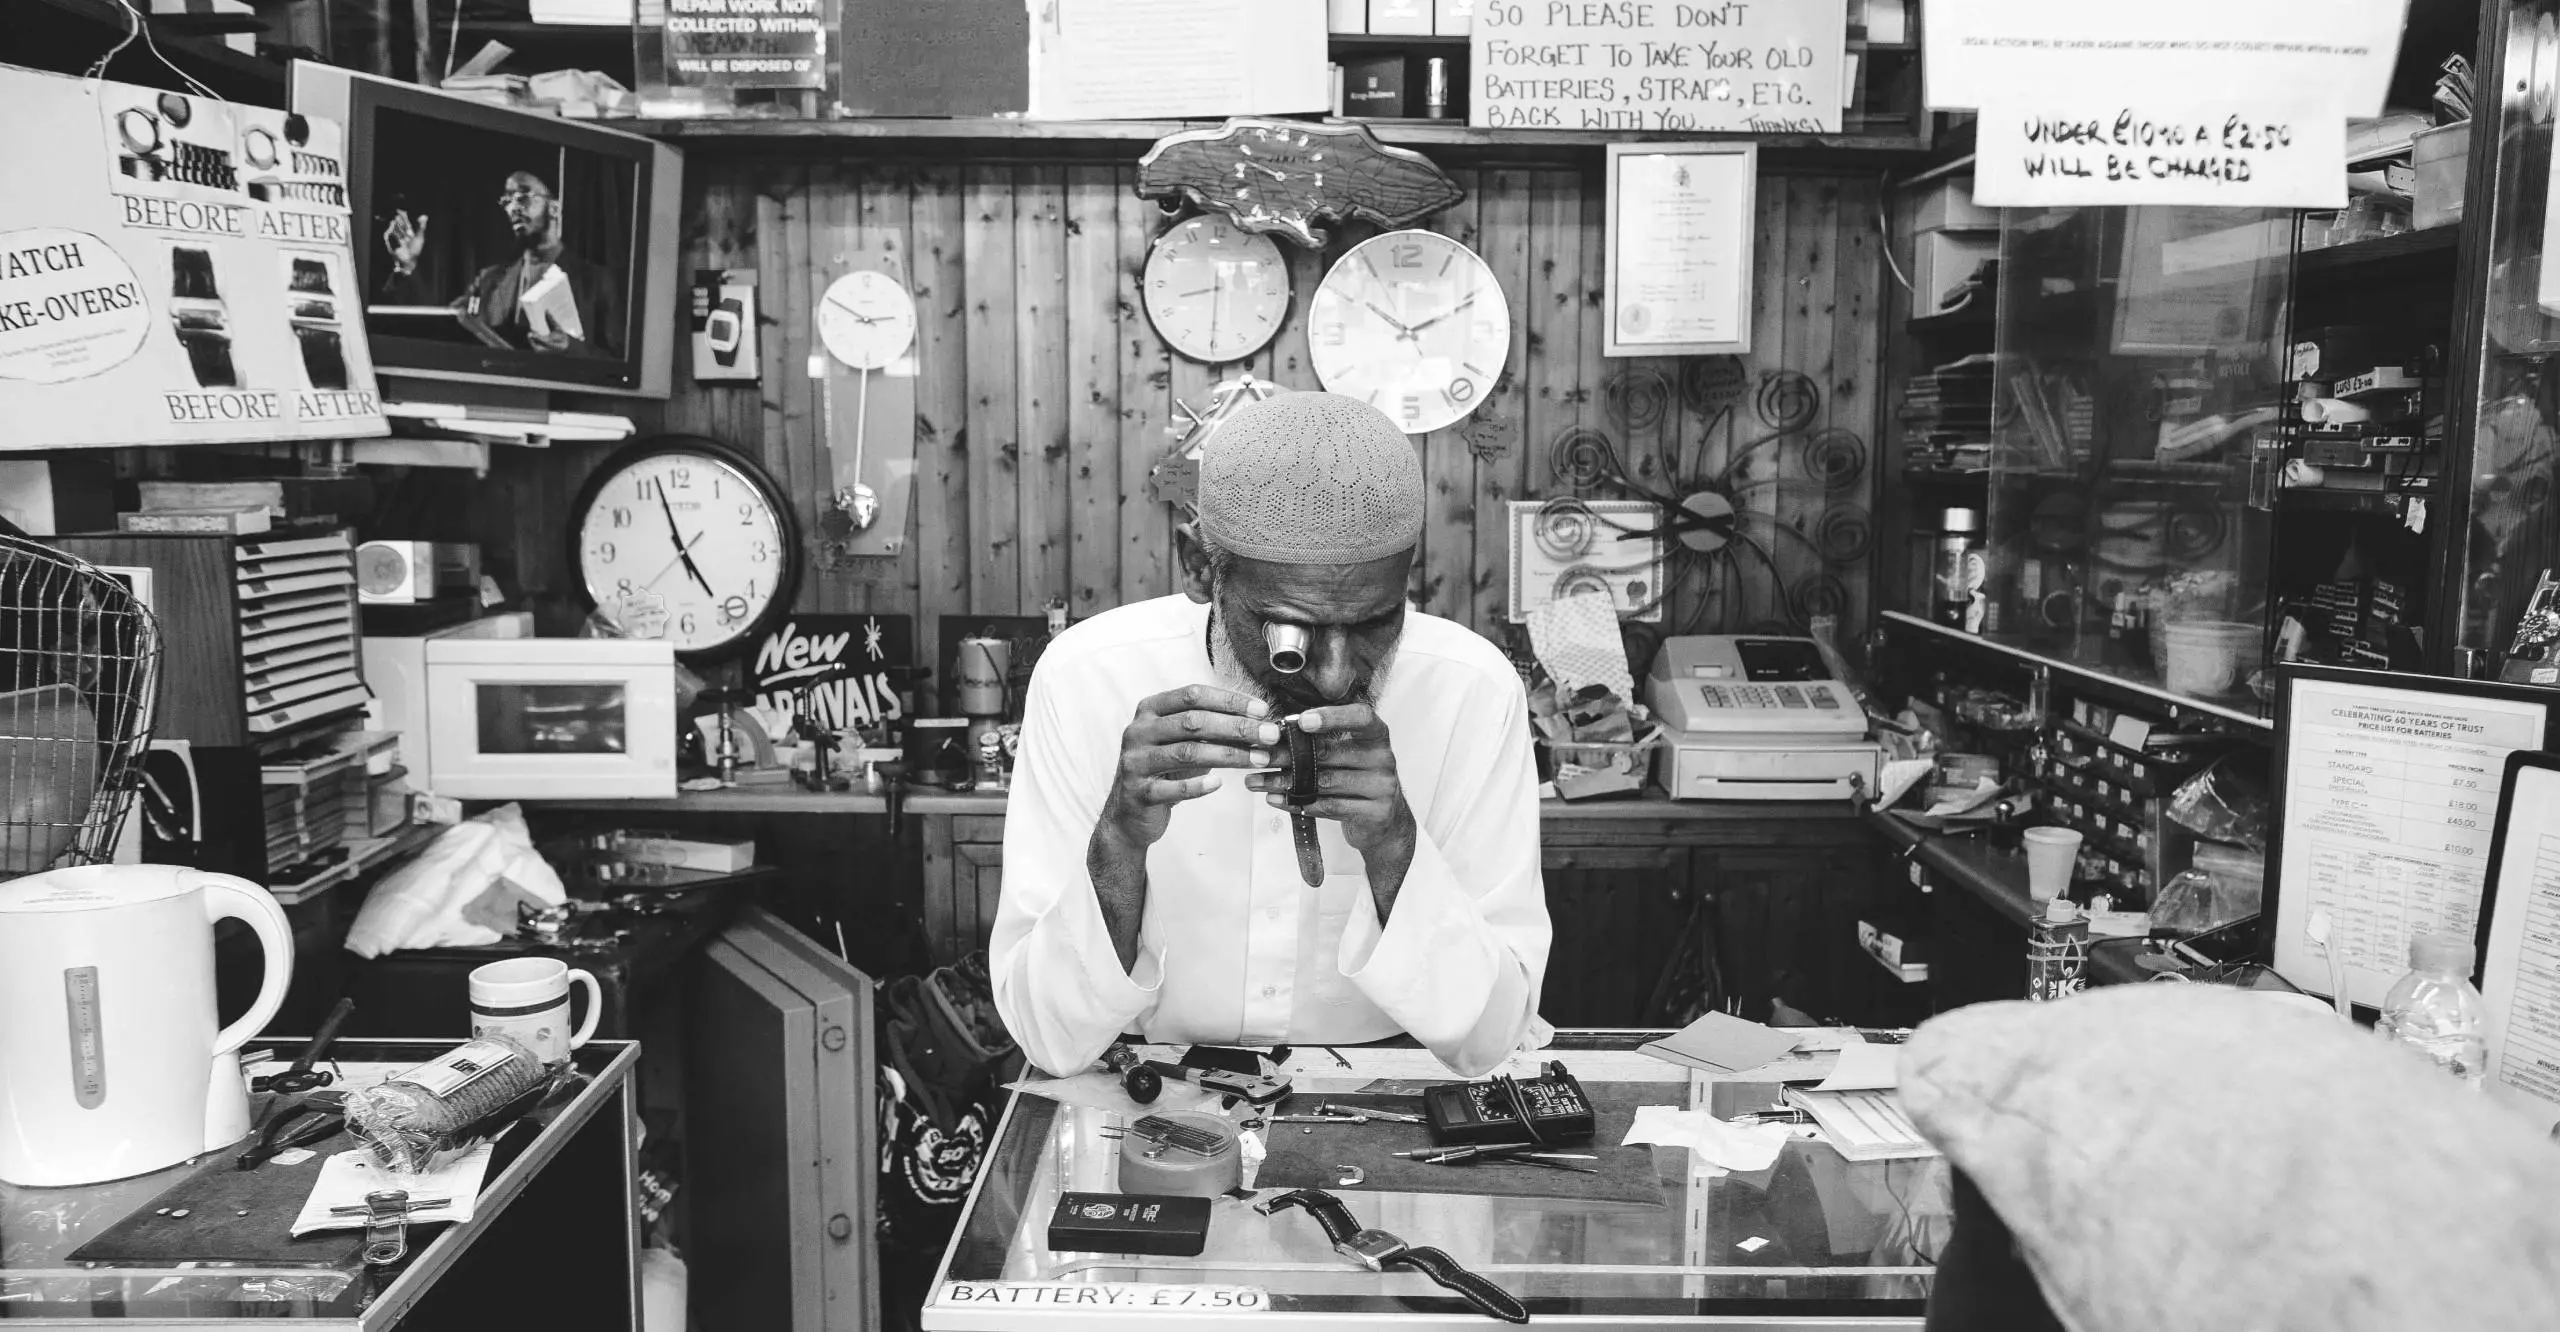 Black and white photograph of a person in a shop looking through a magnifier at a watch they are holding